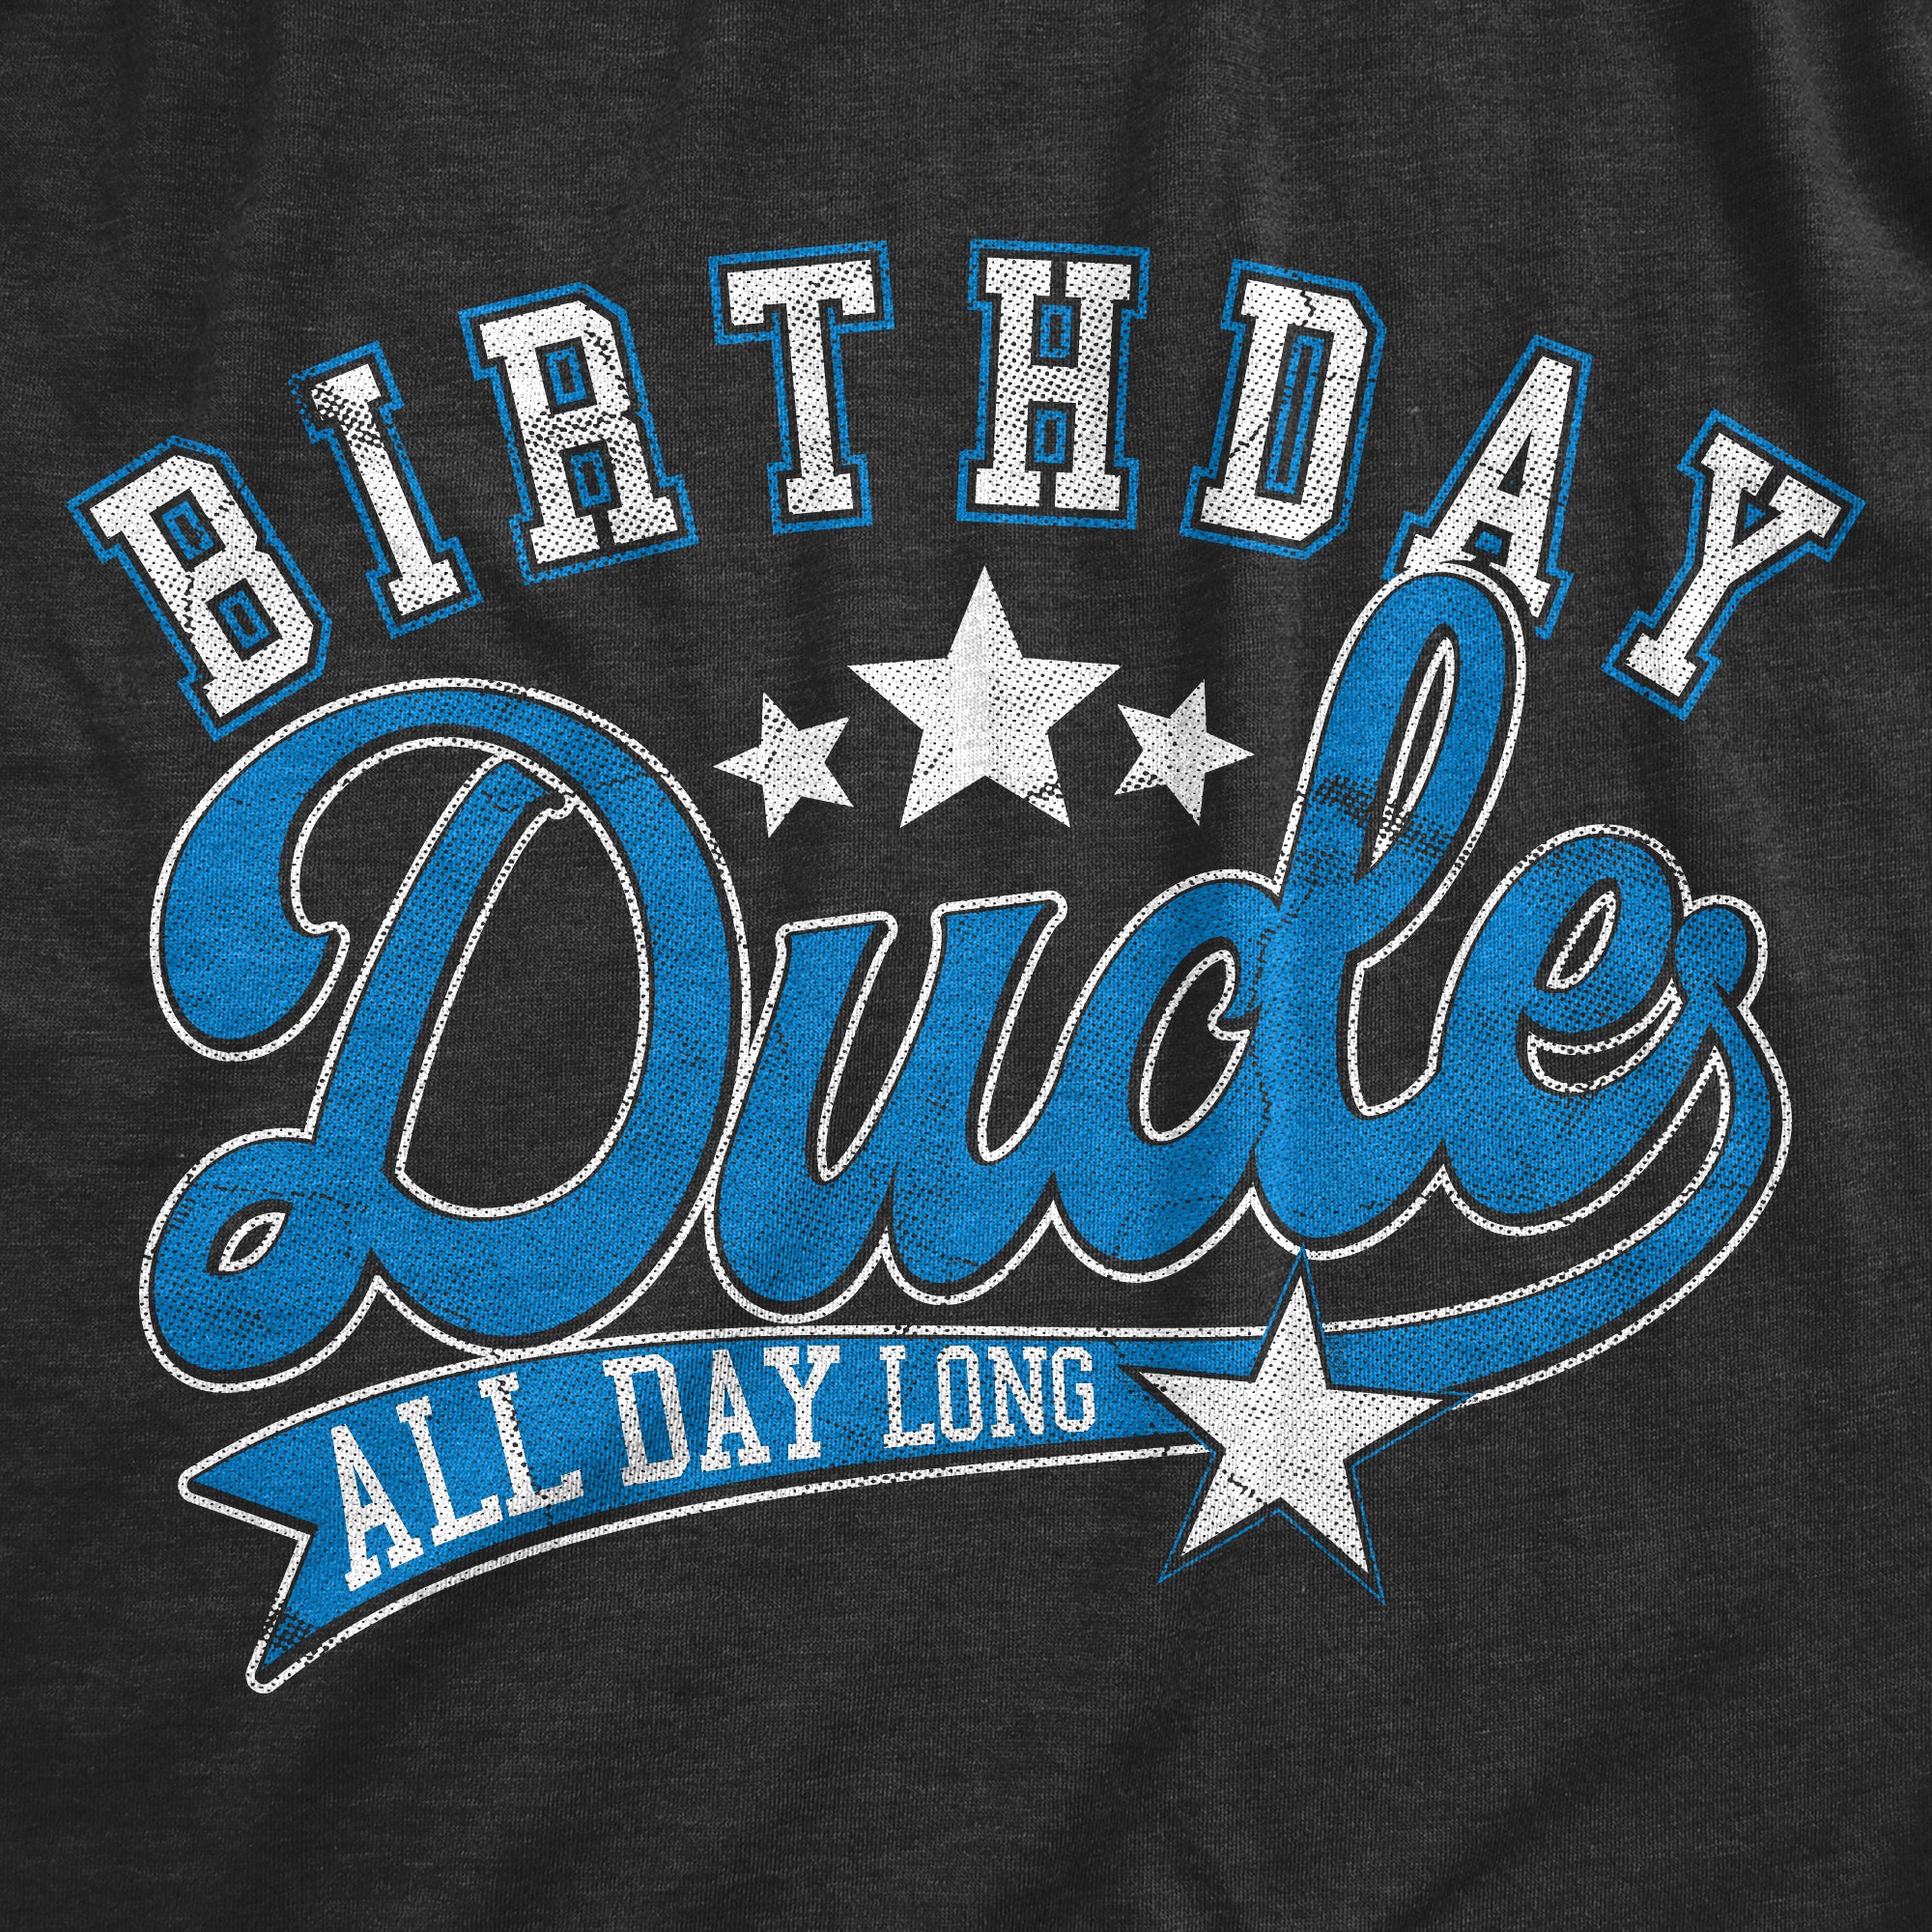 Funny Heather Black - BIRTHDAY Birthday Dude All Day Long Youth T Shirt Nerdy Sarcastic Tee